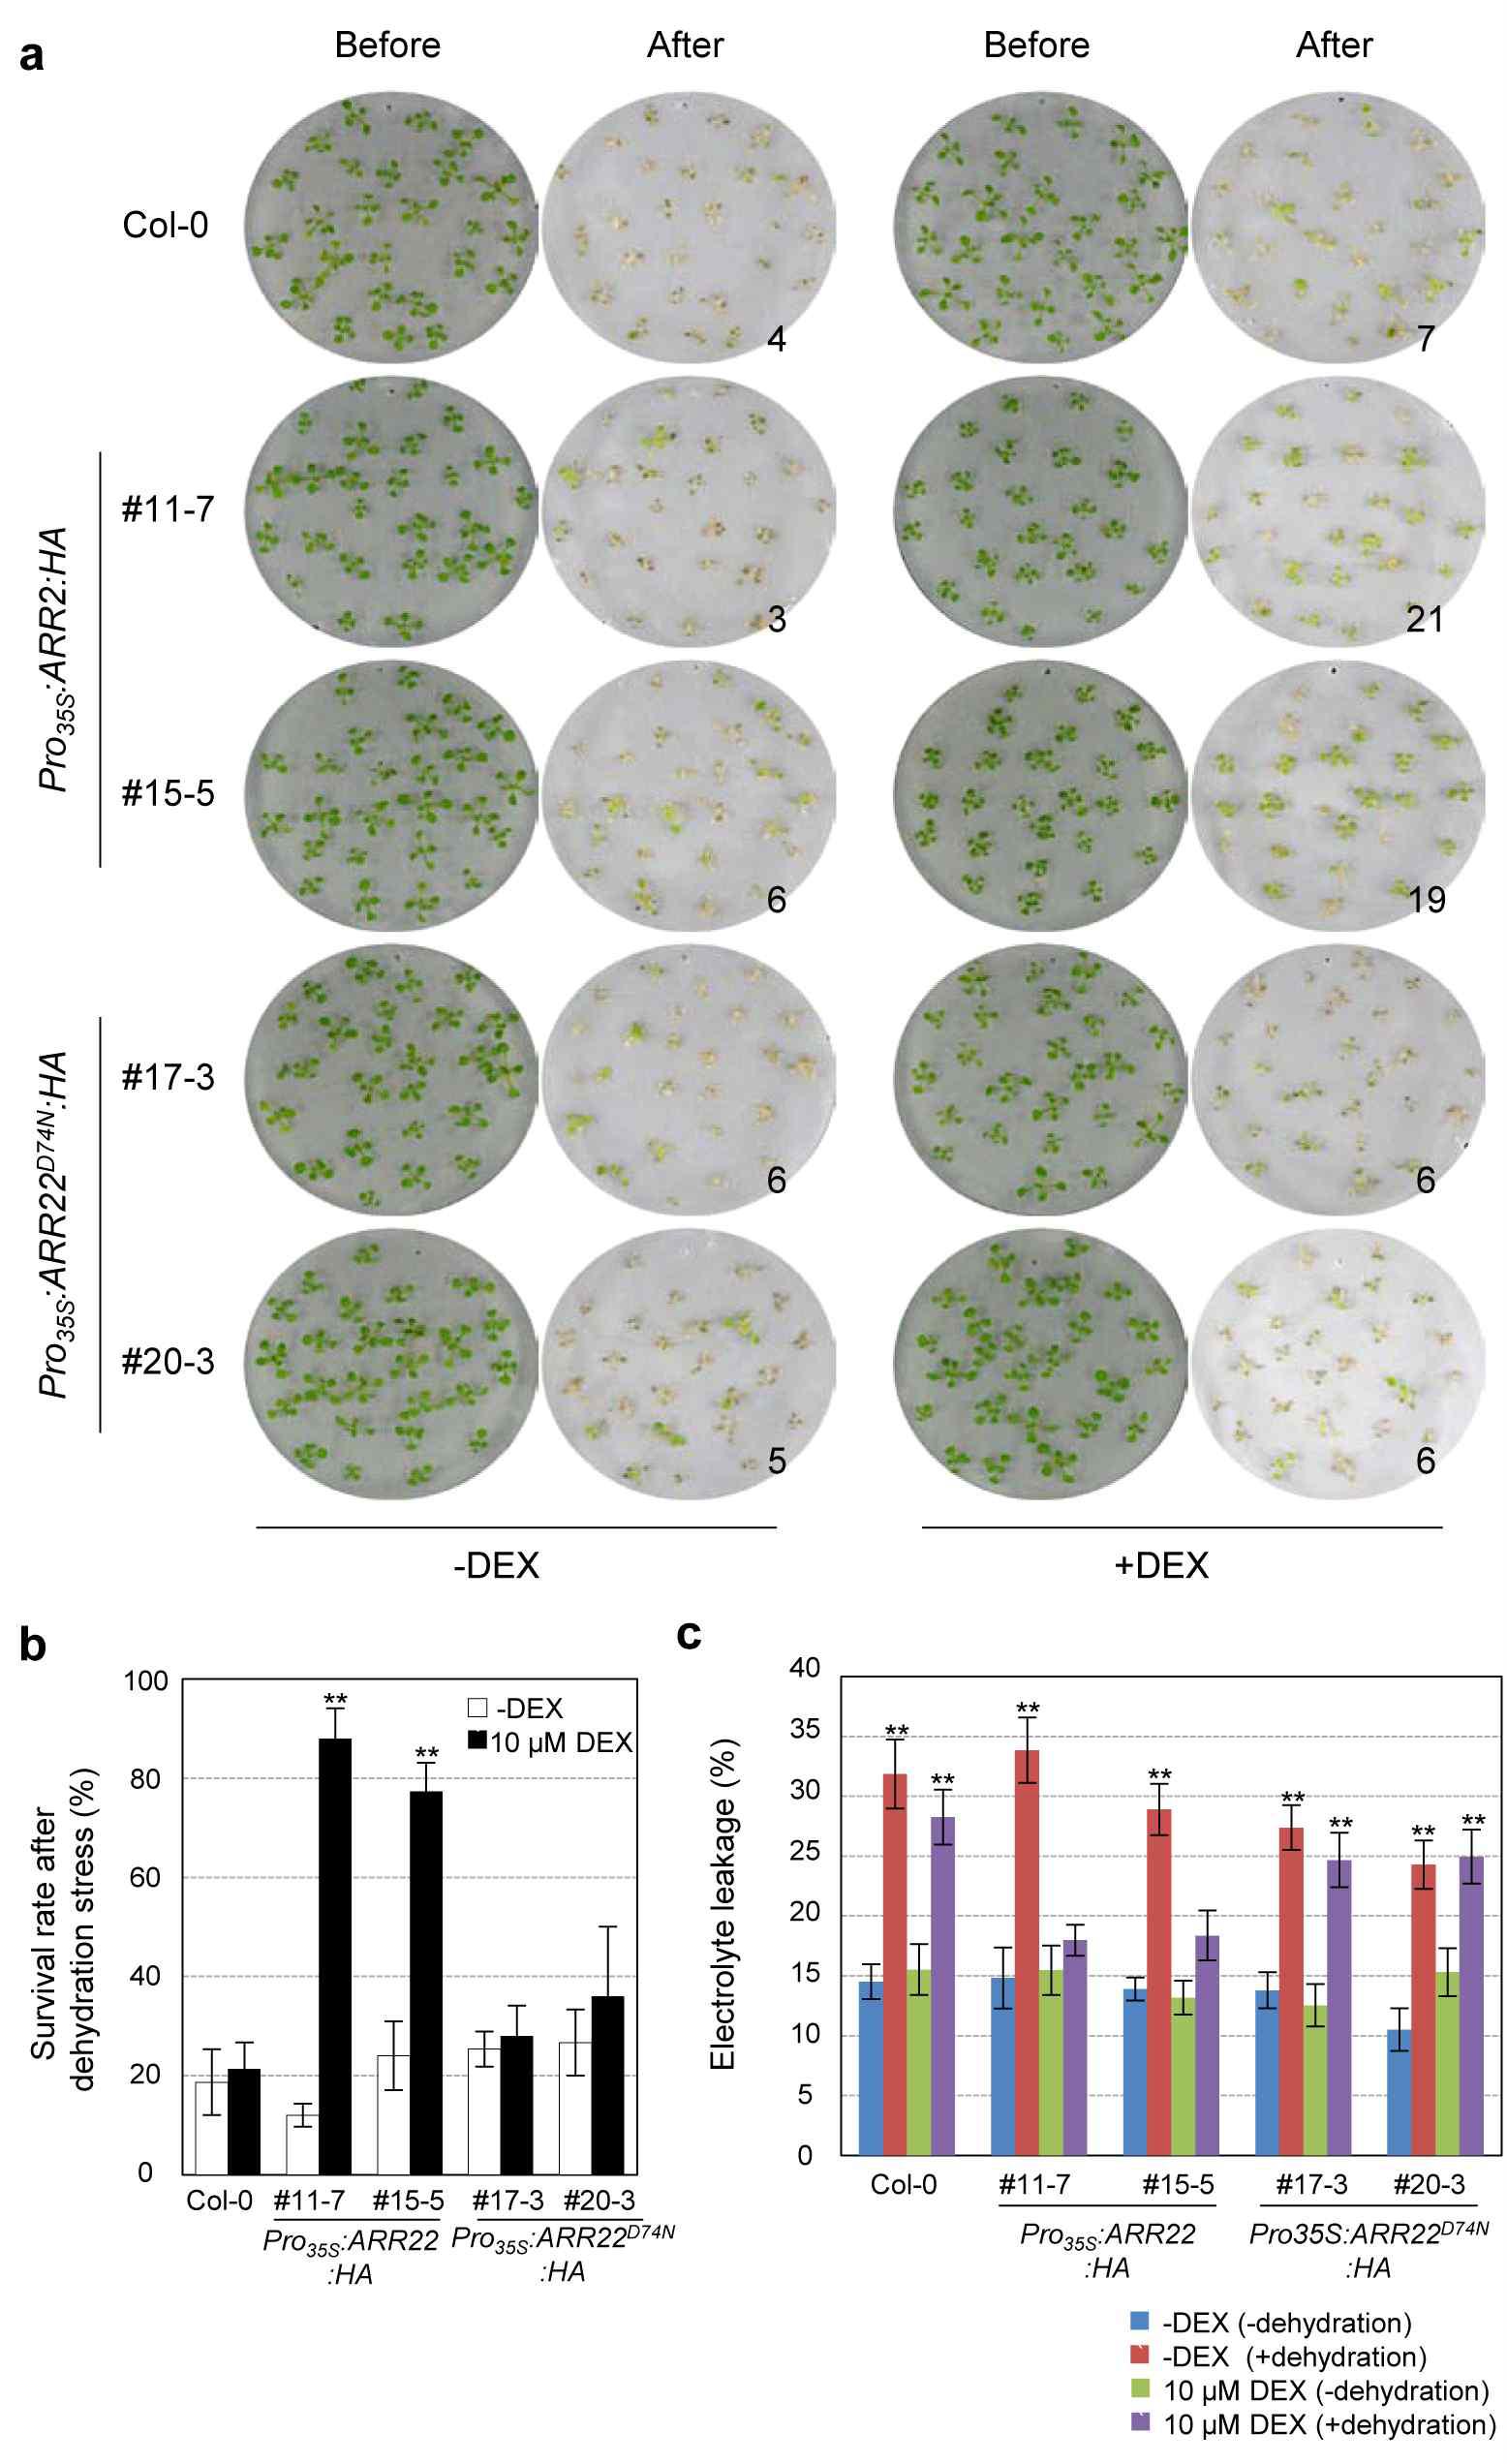 Survival rates and electrolyte leakages of Pro35S:ARR22:HA and Pro35S:ARR22D74N:HA transgenic Arabidopsis plants treated with or without DEX after dehydration stress treatment.